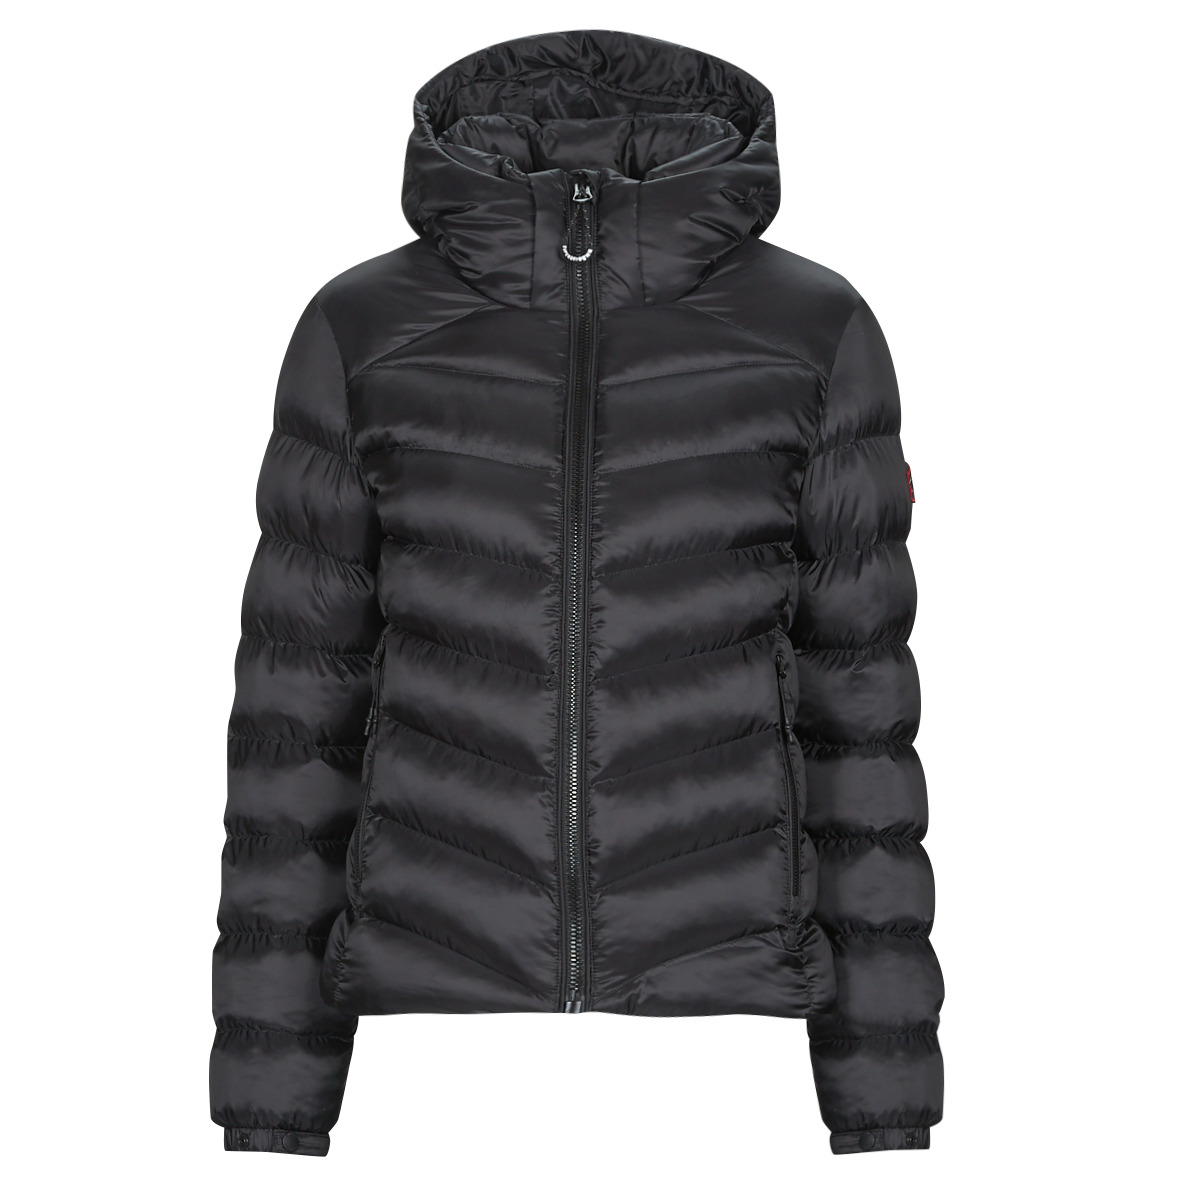 PADDED | ! Black Superdry Free FUJI - HOODED Duffel delivery Spartoo JACKET NET coats Women - Clothing